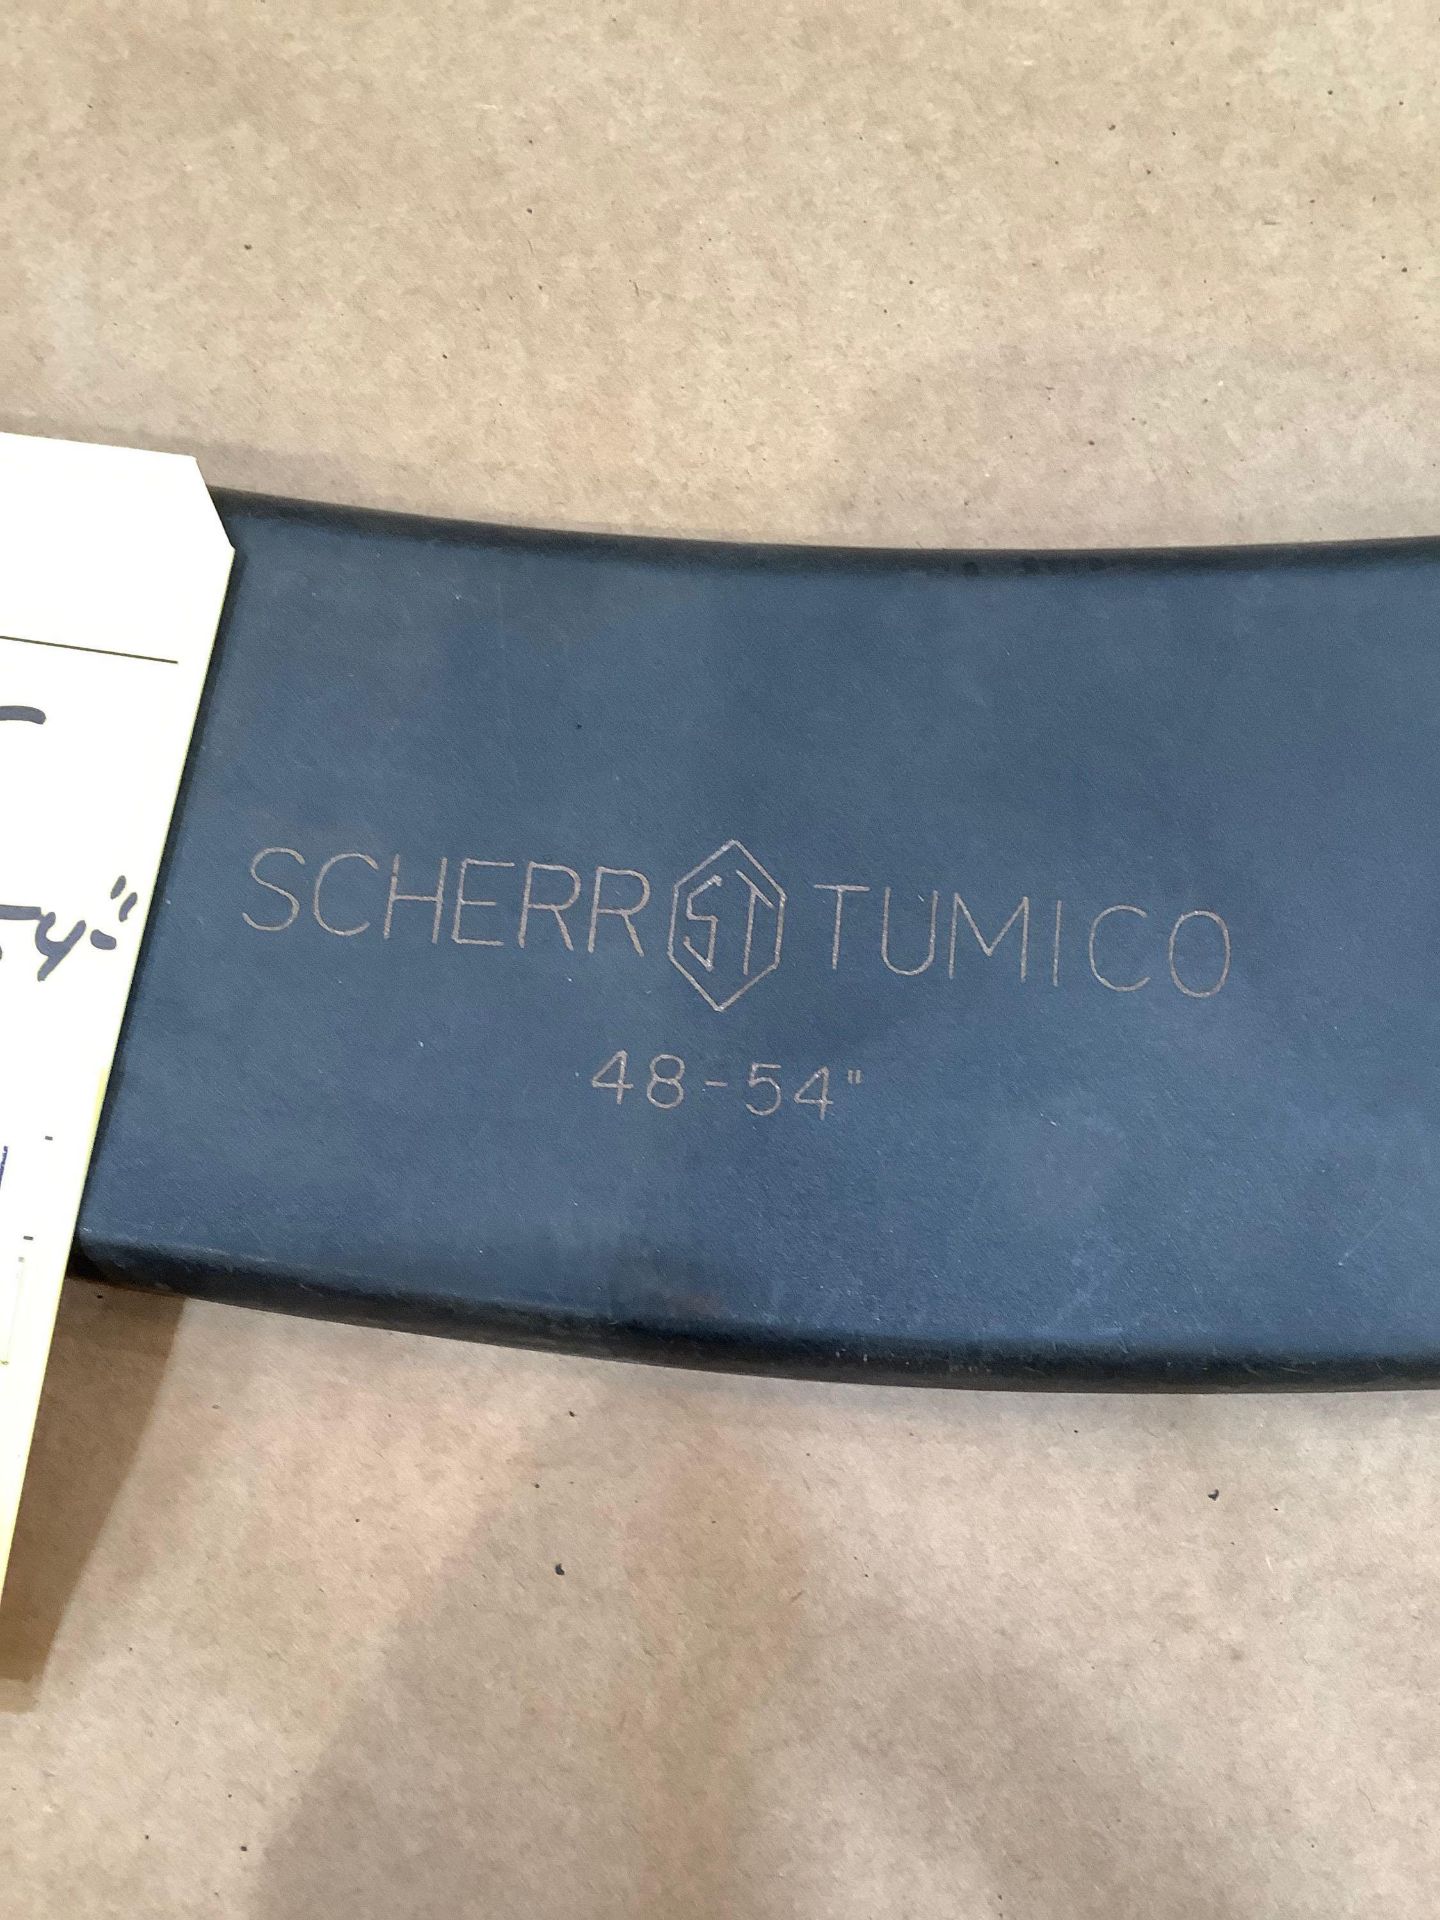 Scherr-Tumico O.D. Micrometer 48" to 54" - Image 2 of 3